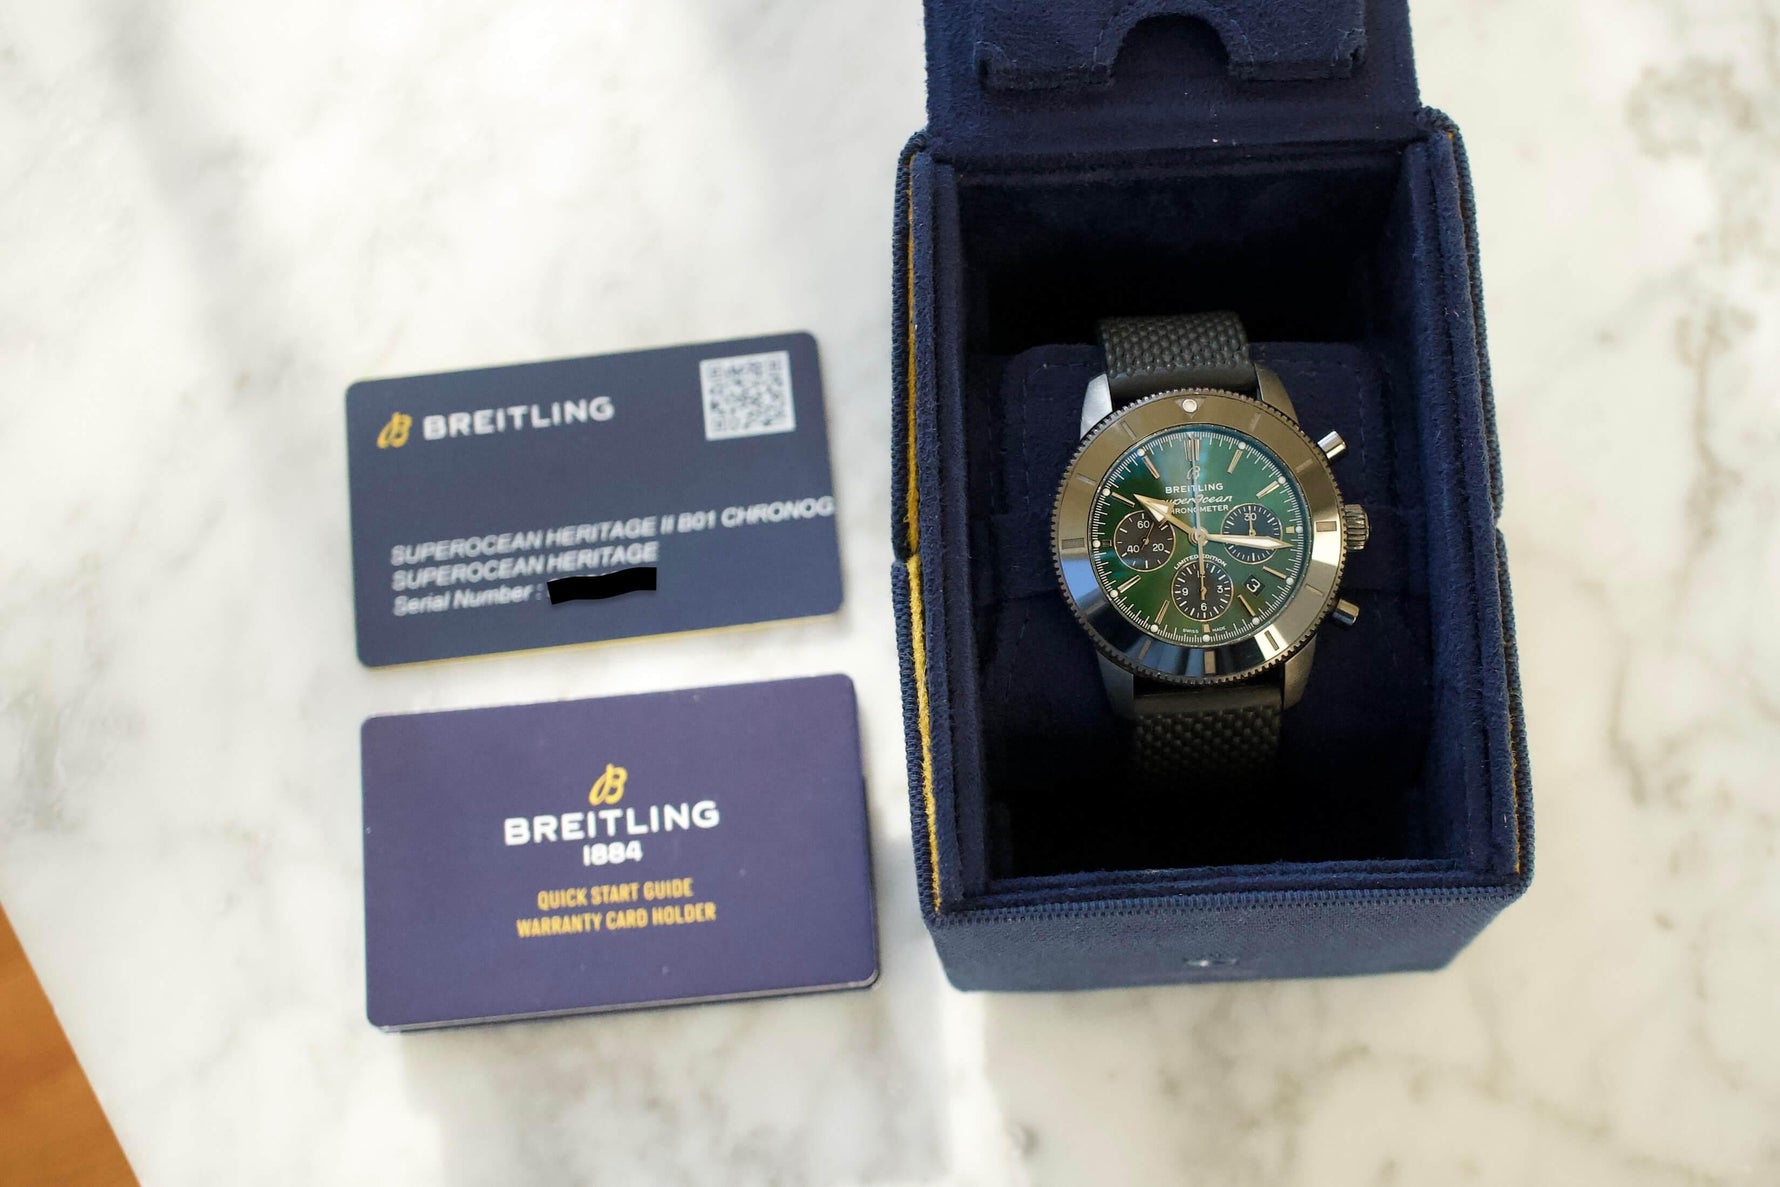 SOLD OUT: Breliting SuperOcean Heritage MB01621A1L1S1 B01 44mm Chronograph DLC xx/250 Warranty 2026 - WearingTime Luxury Watches